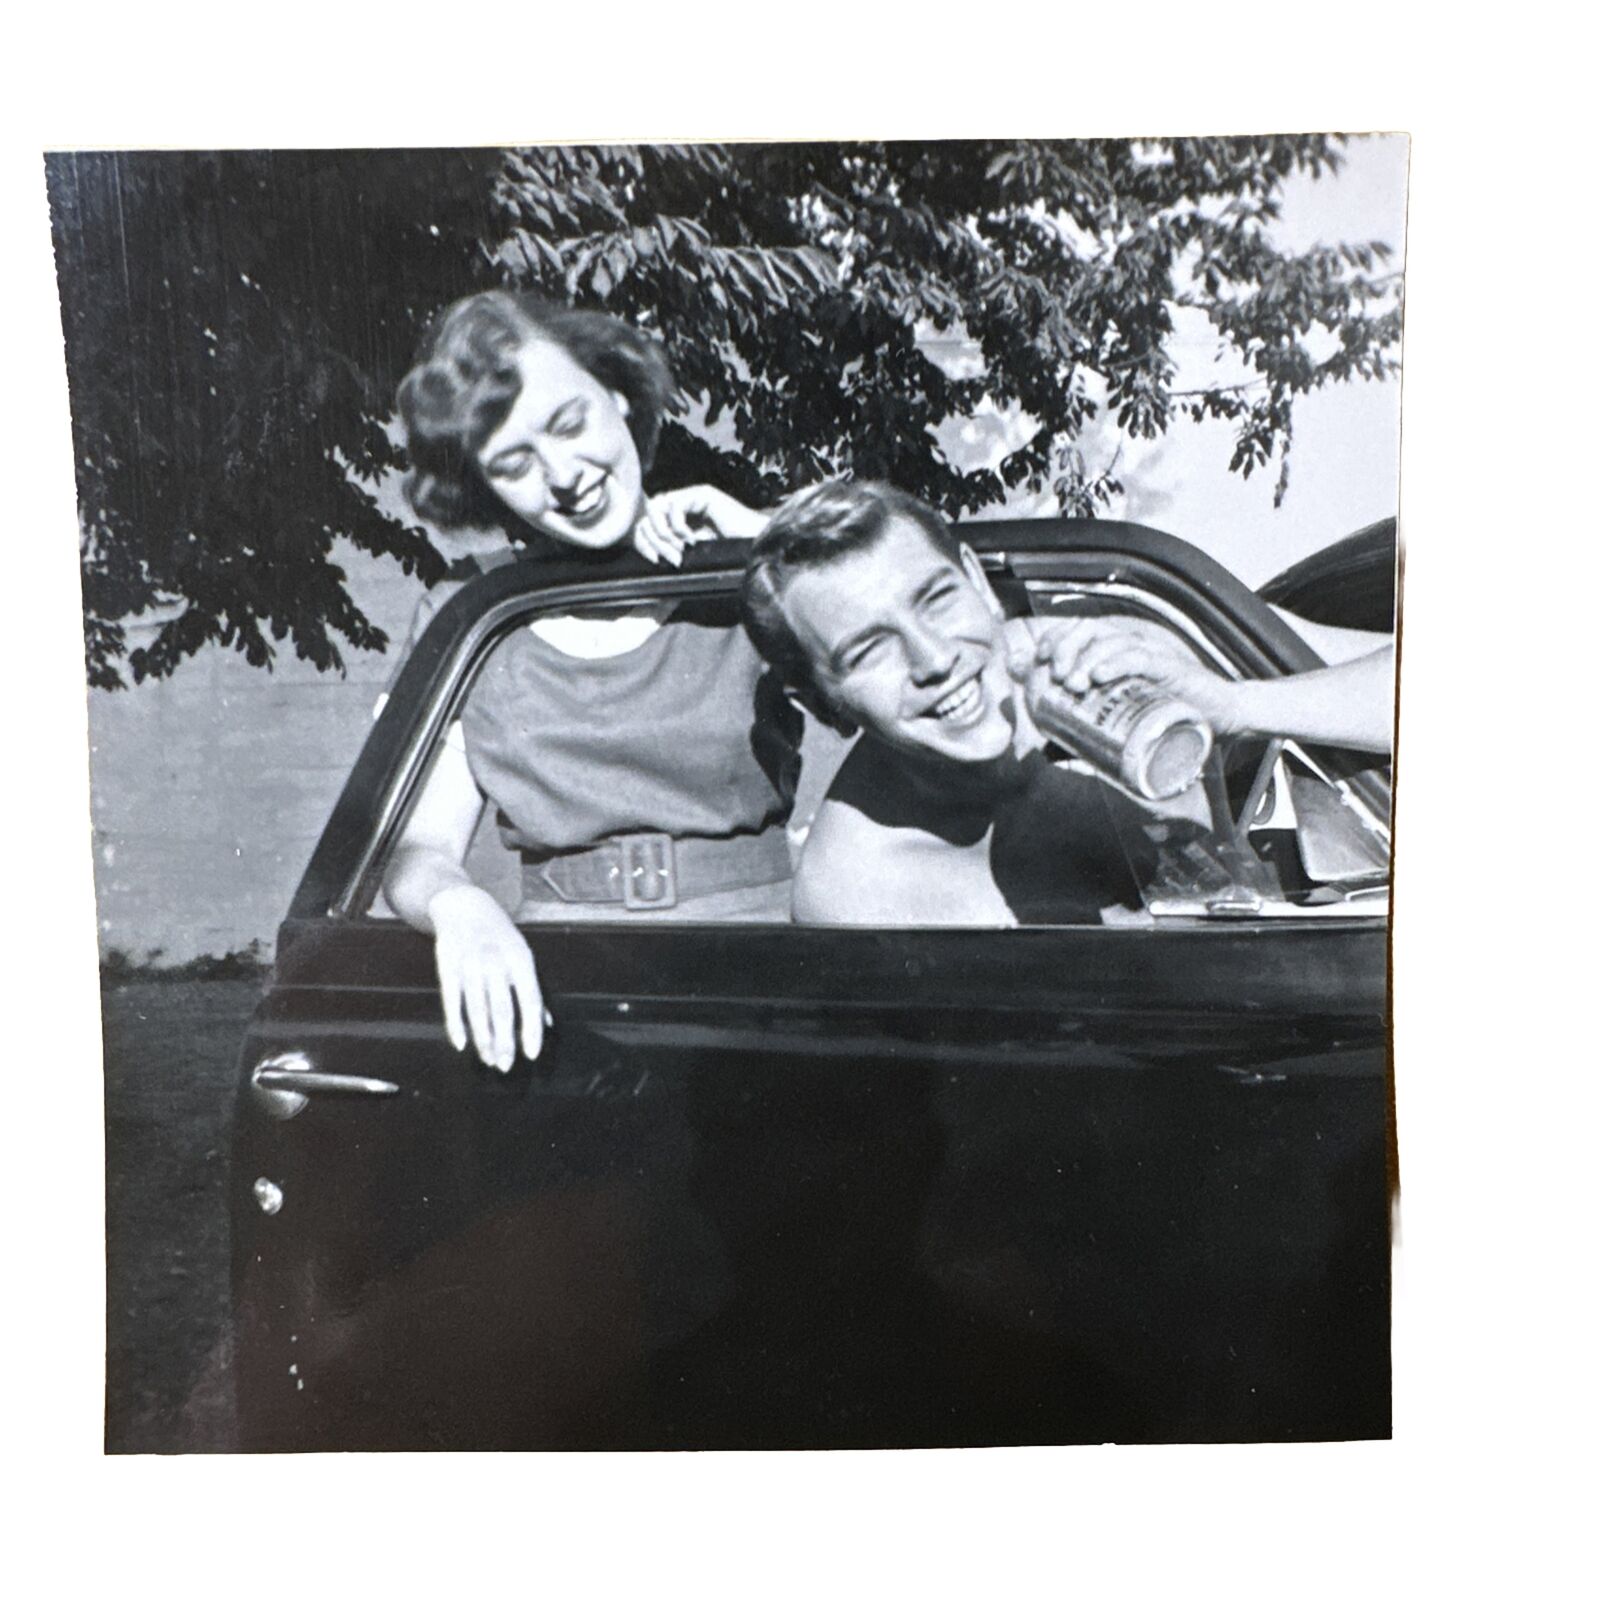 VINTAGE PHOTO Attractive named couple Drinking Beer in 1947-1949 Studebaker Car